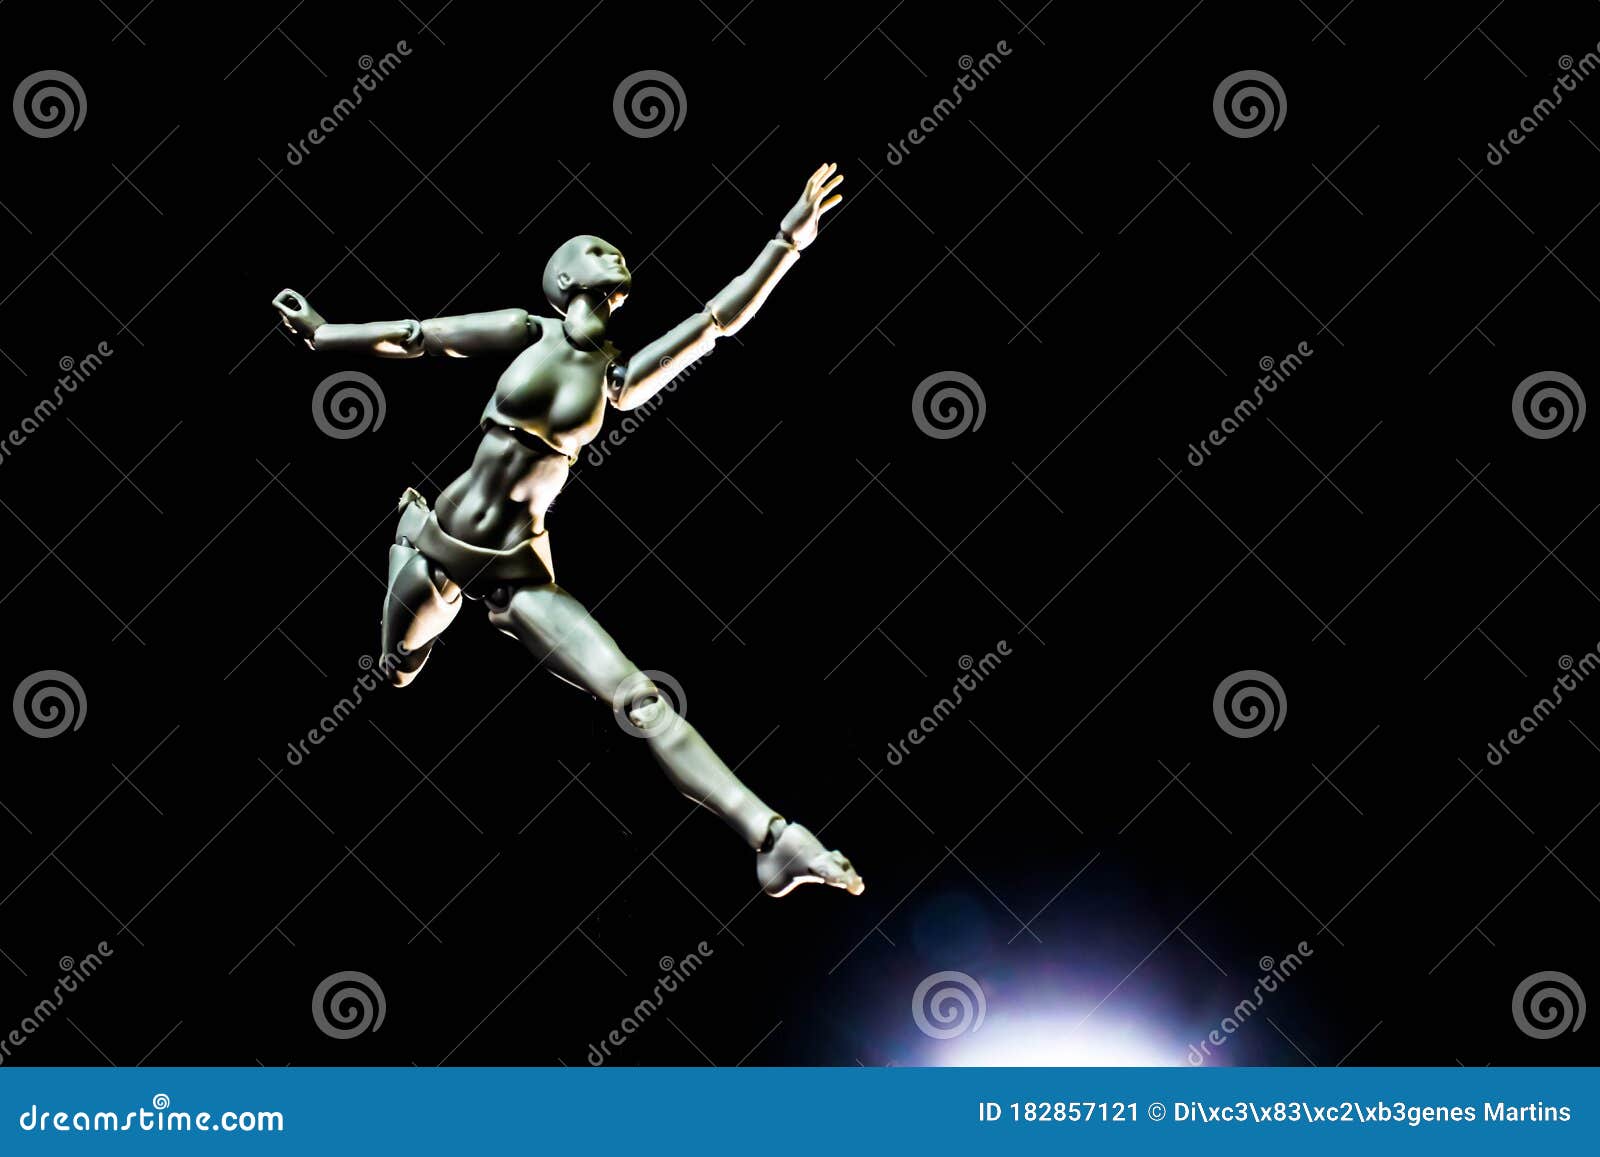 articulated-doll-model-acting-posing-black-background-pose-chatting-serious-theather-scene-ballet-dance-dancing-female-woman-doll-182857121.jpg